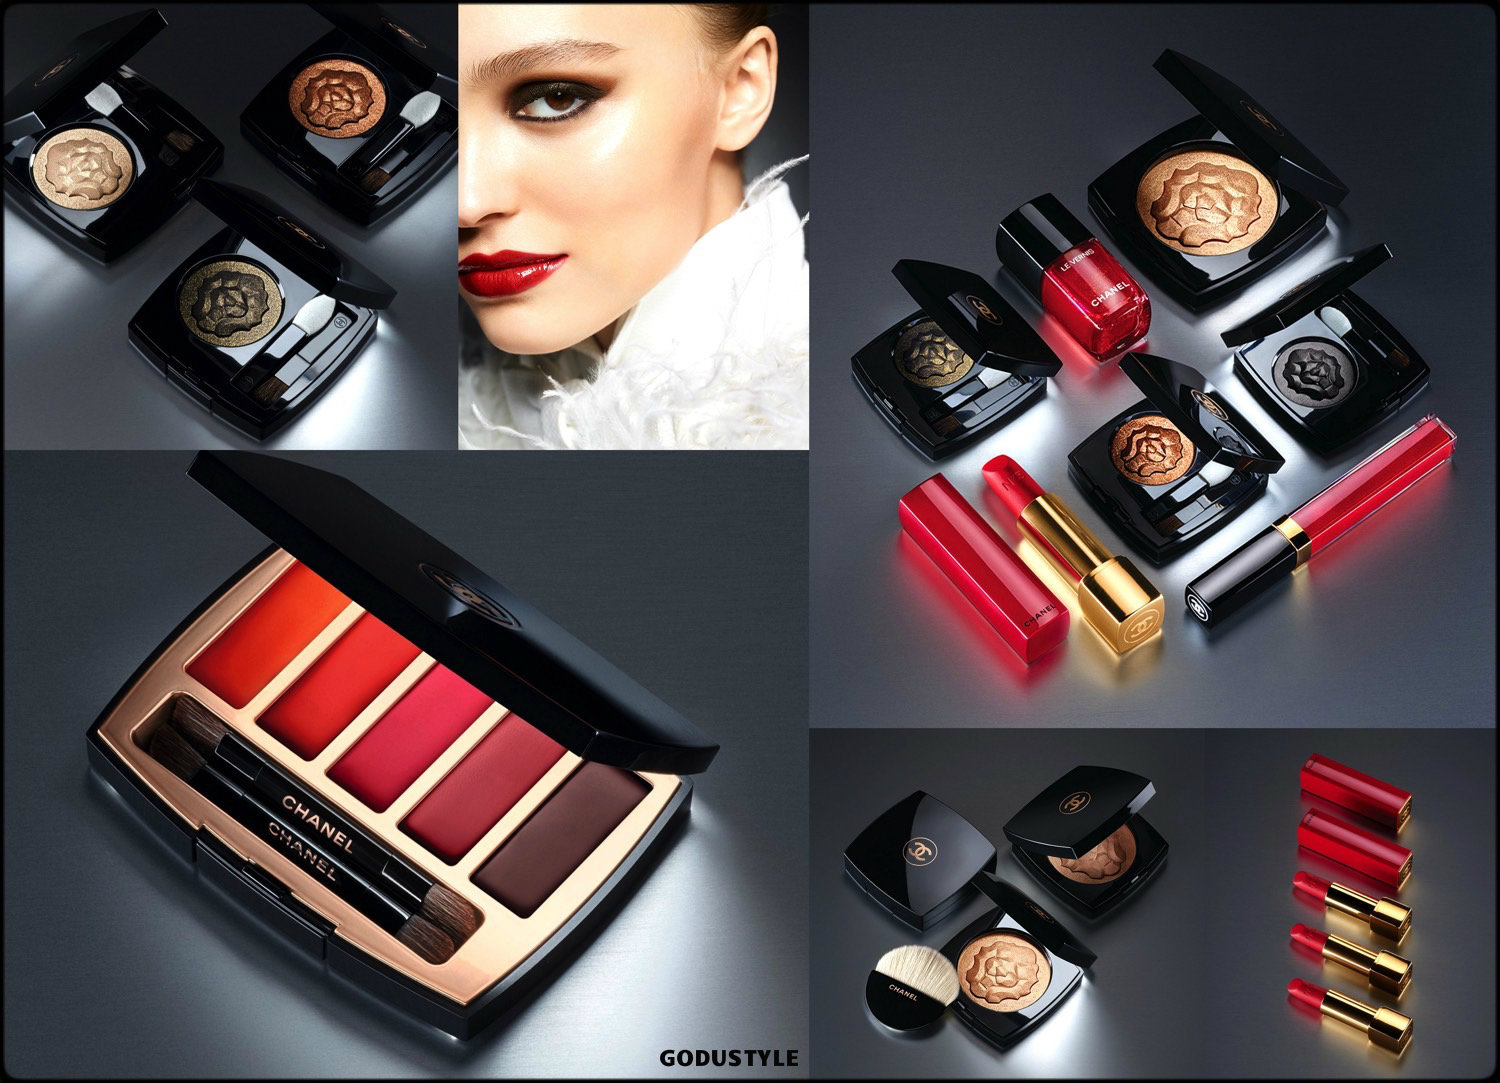 chanel-libre-holiday-2018-makeup-collection-look-style12-shopping-godustyle